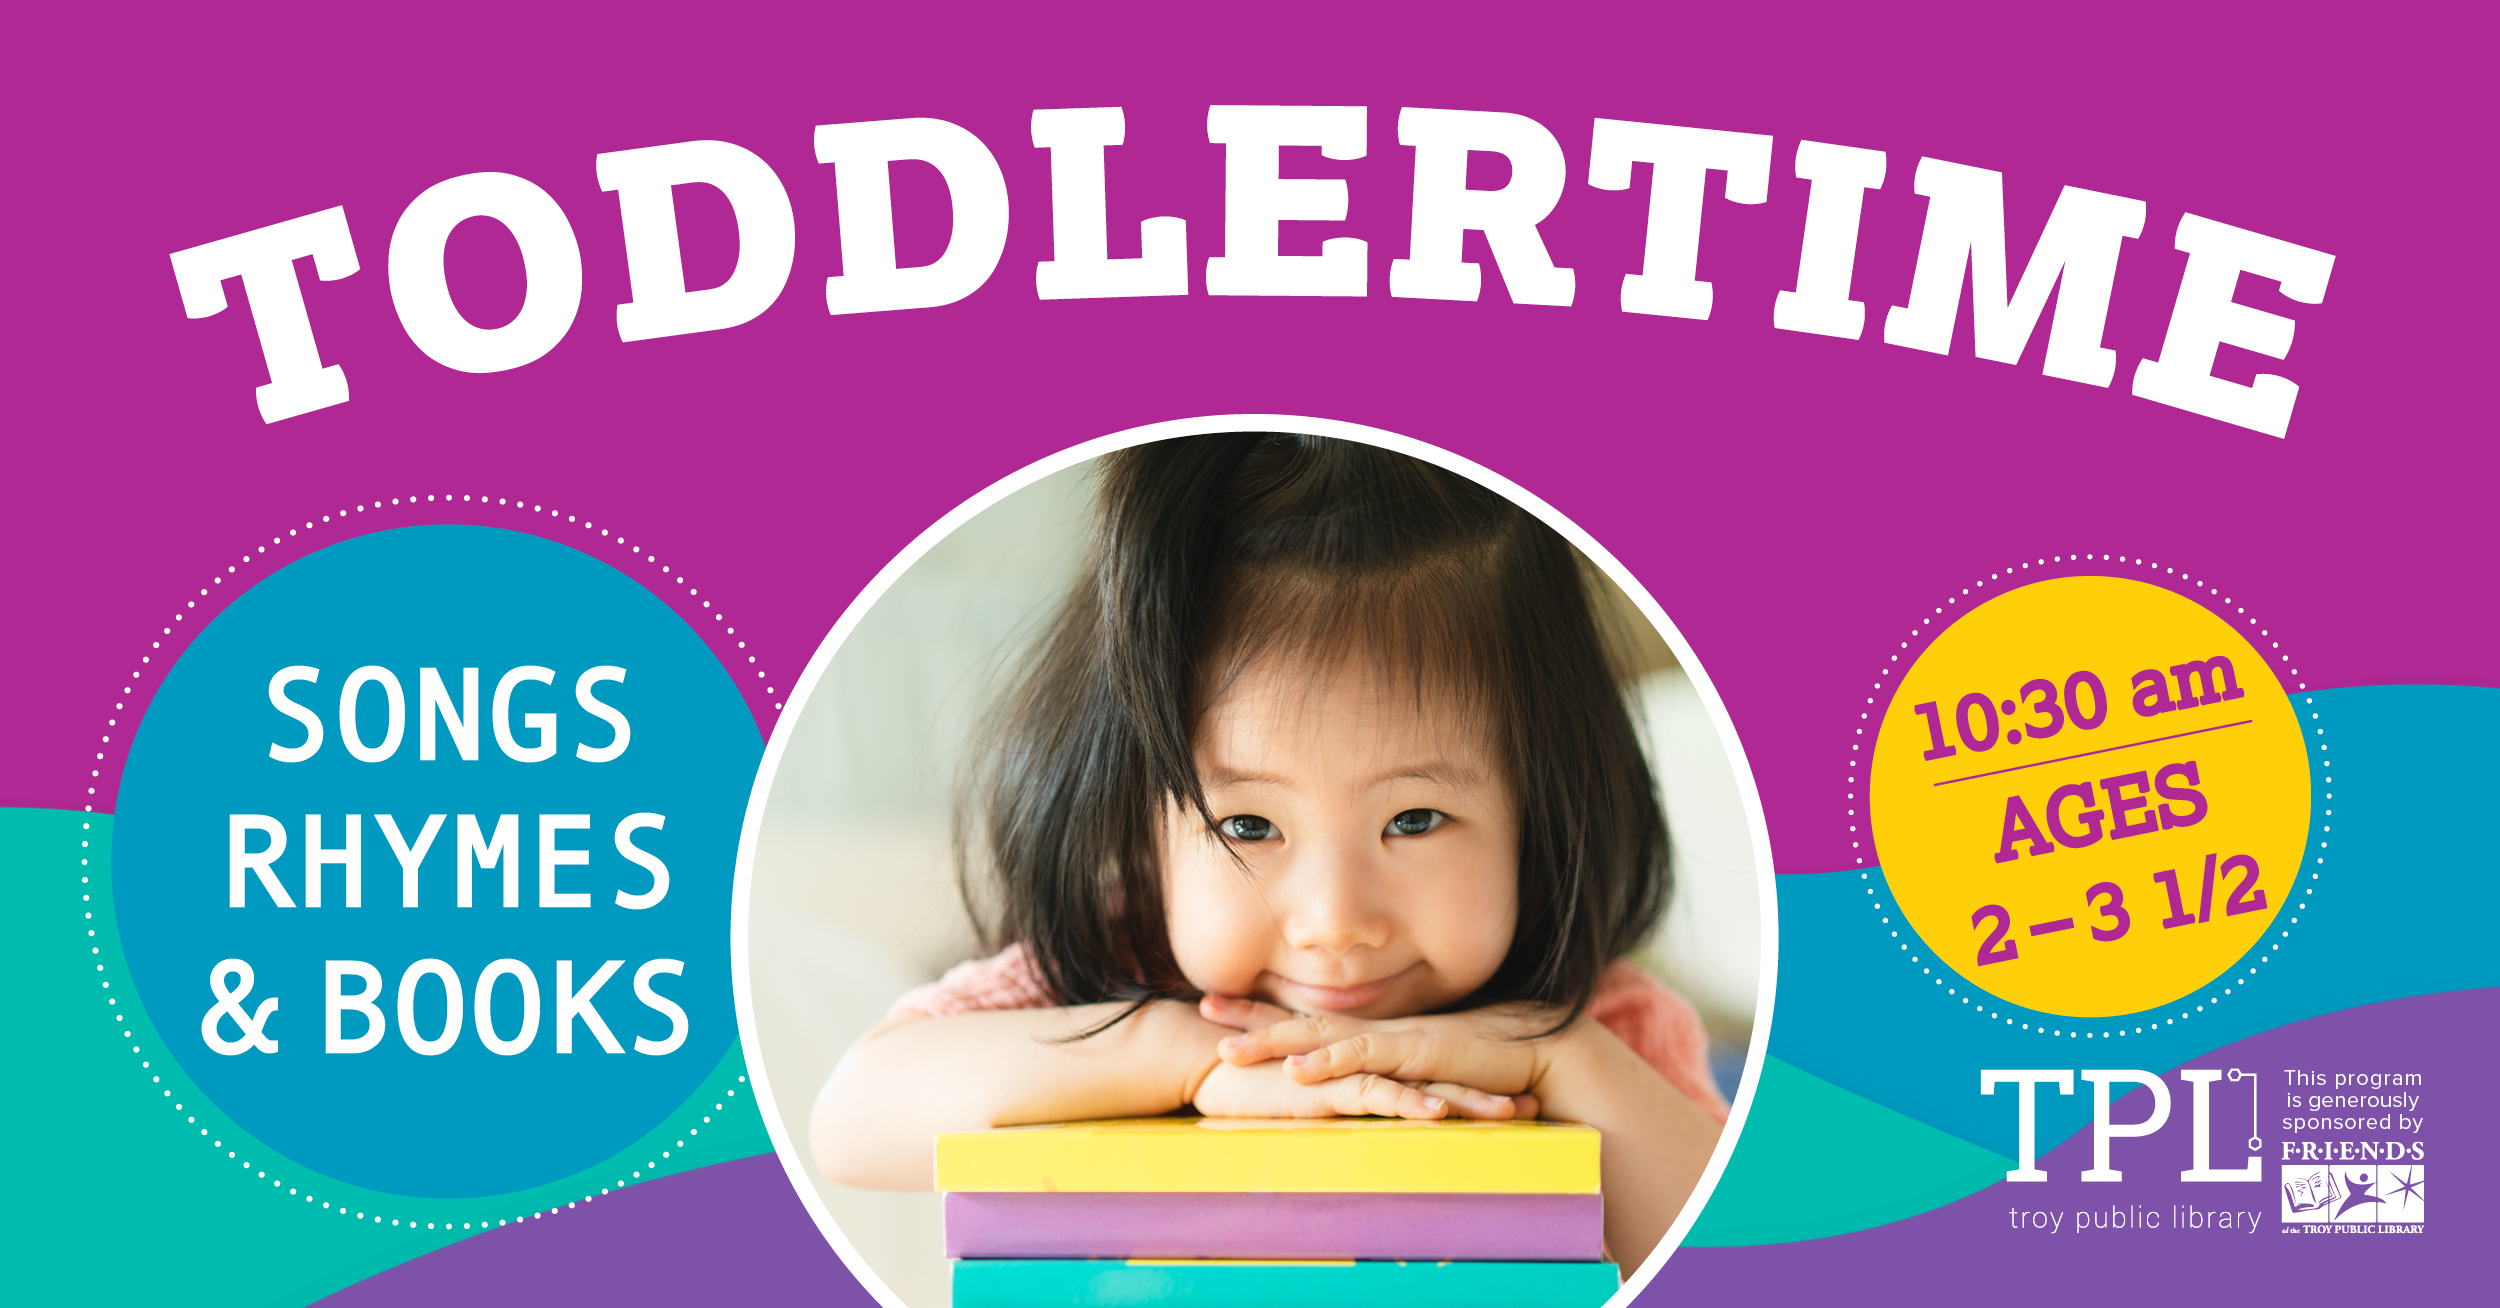 A picture of a toddler with books, along with the text Toddlertime, ages 2 to 3 and a half, 10:30 AM, songs, rhymes, and books. Sponsored by the Friends of the Troy Public Library.